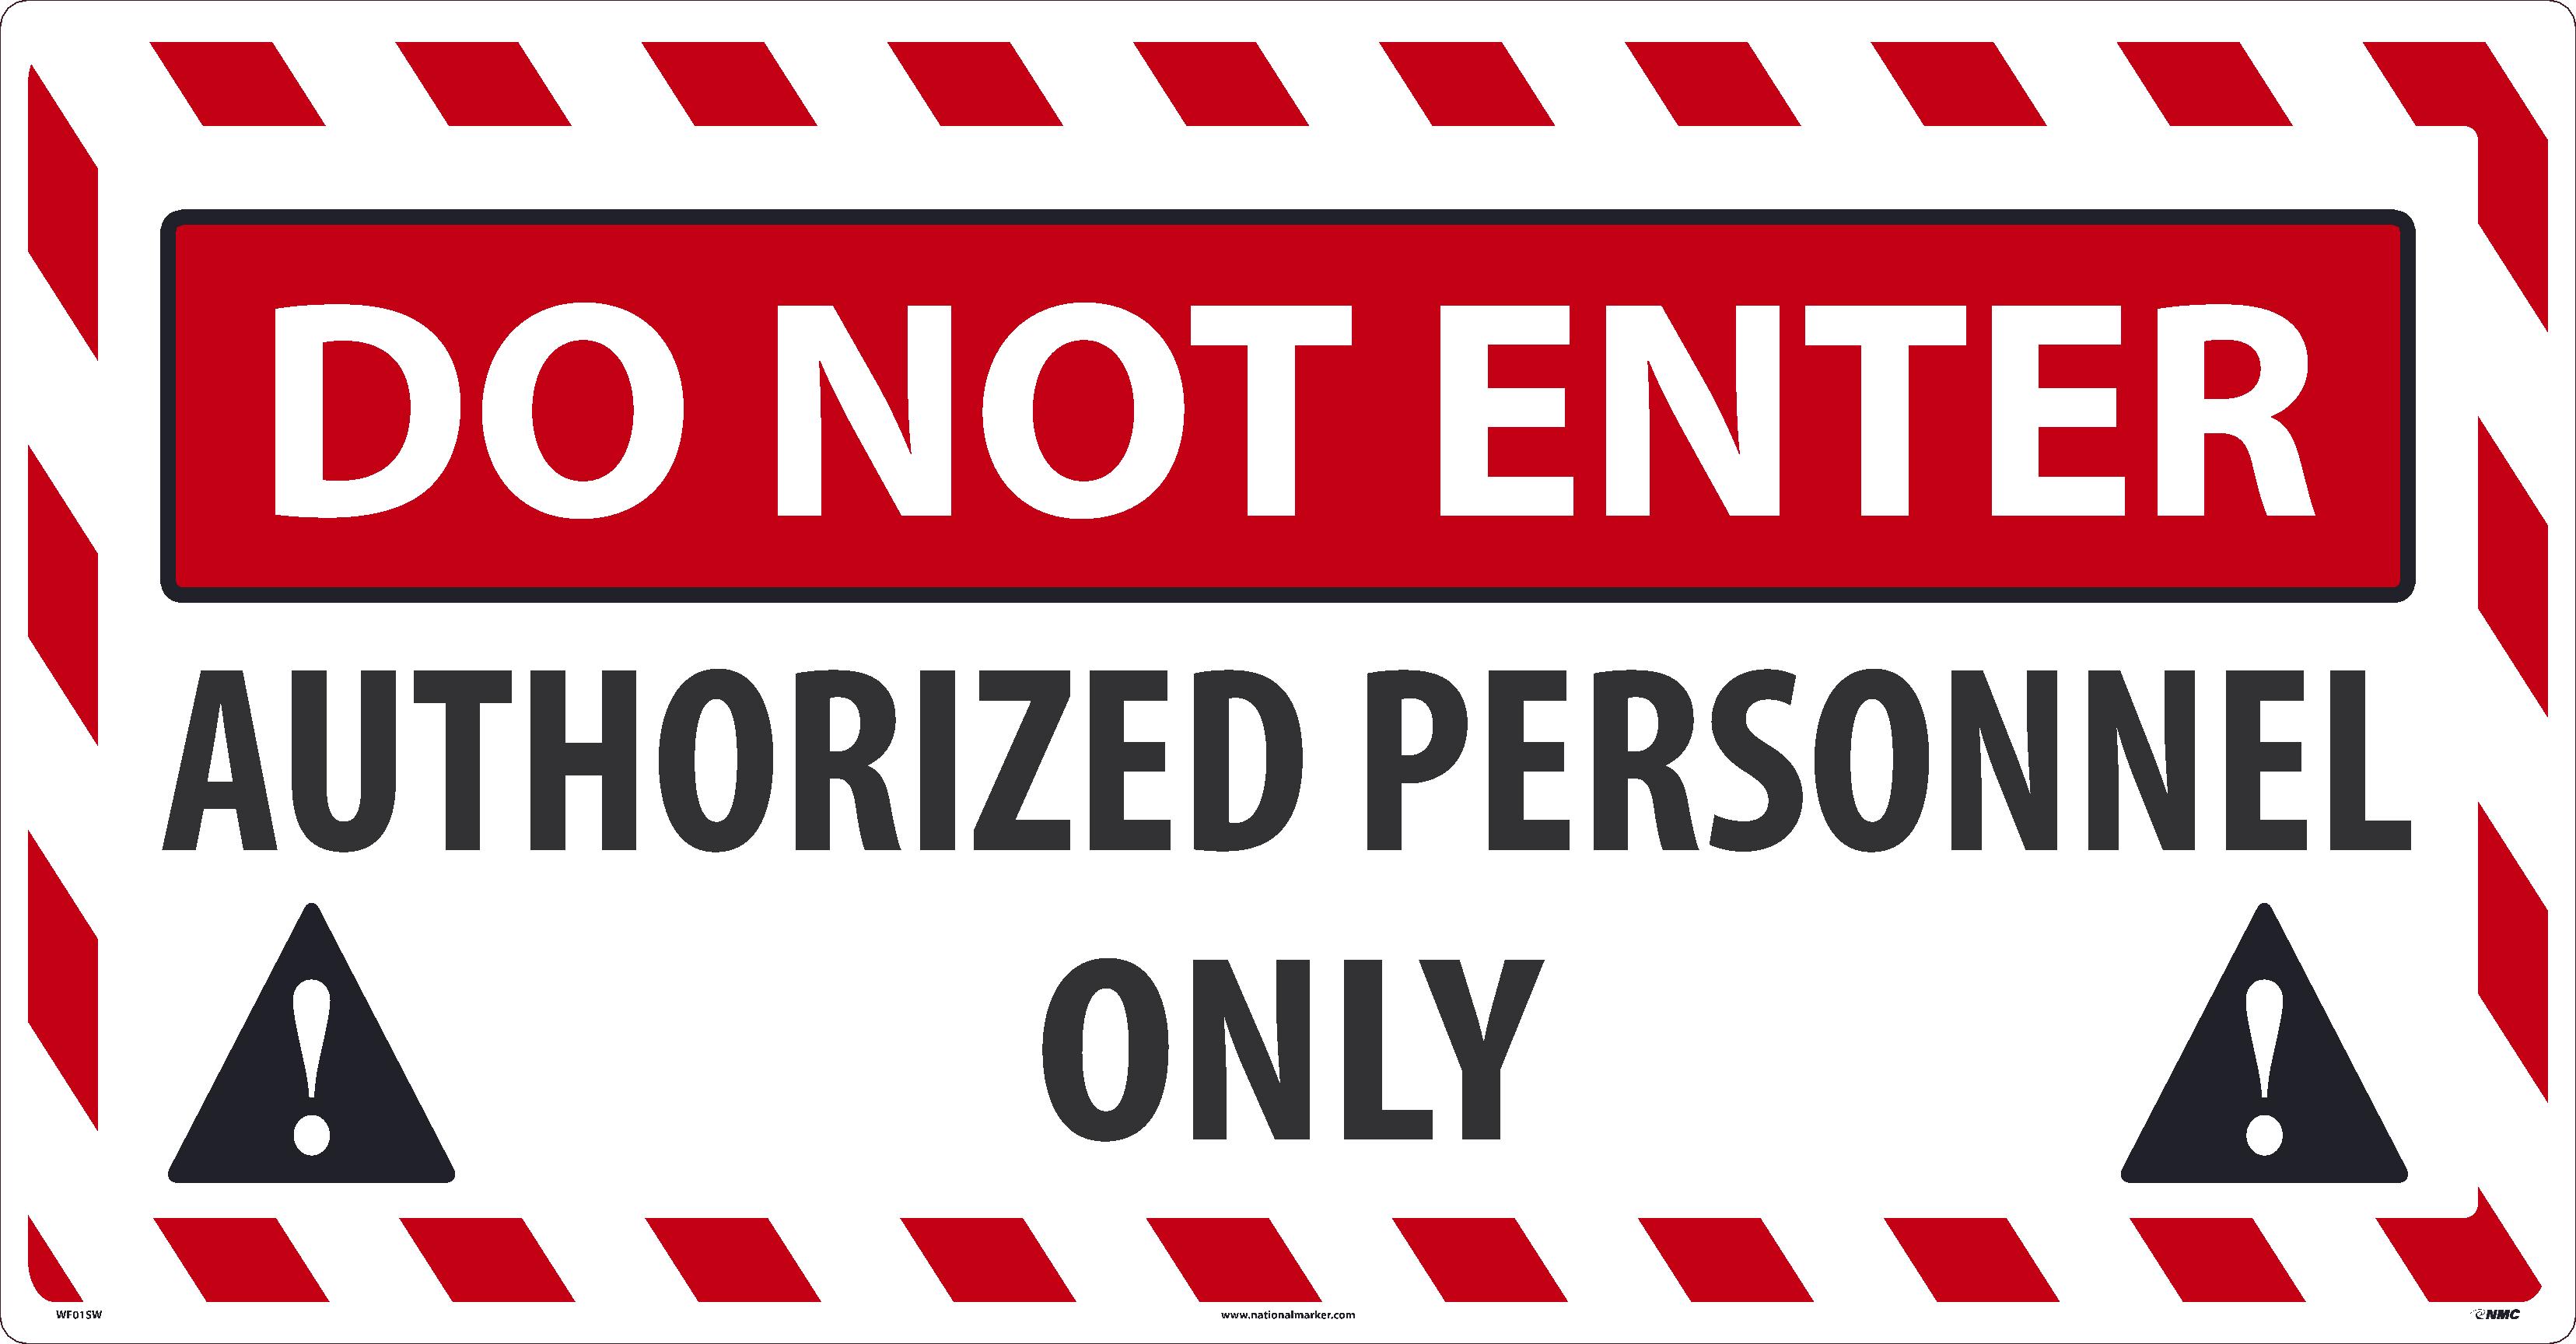 Not allowed speed. Do not enter authorized personnel only. Authorized personnel only. Caution authorized personnel only. Do not enter authorized personnel only signs.